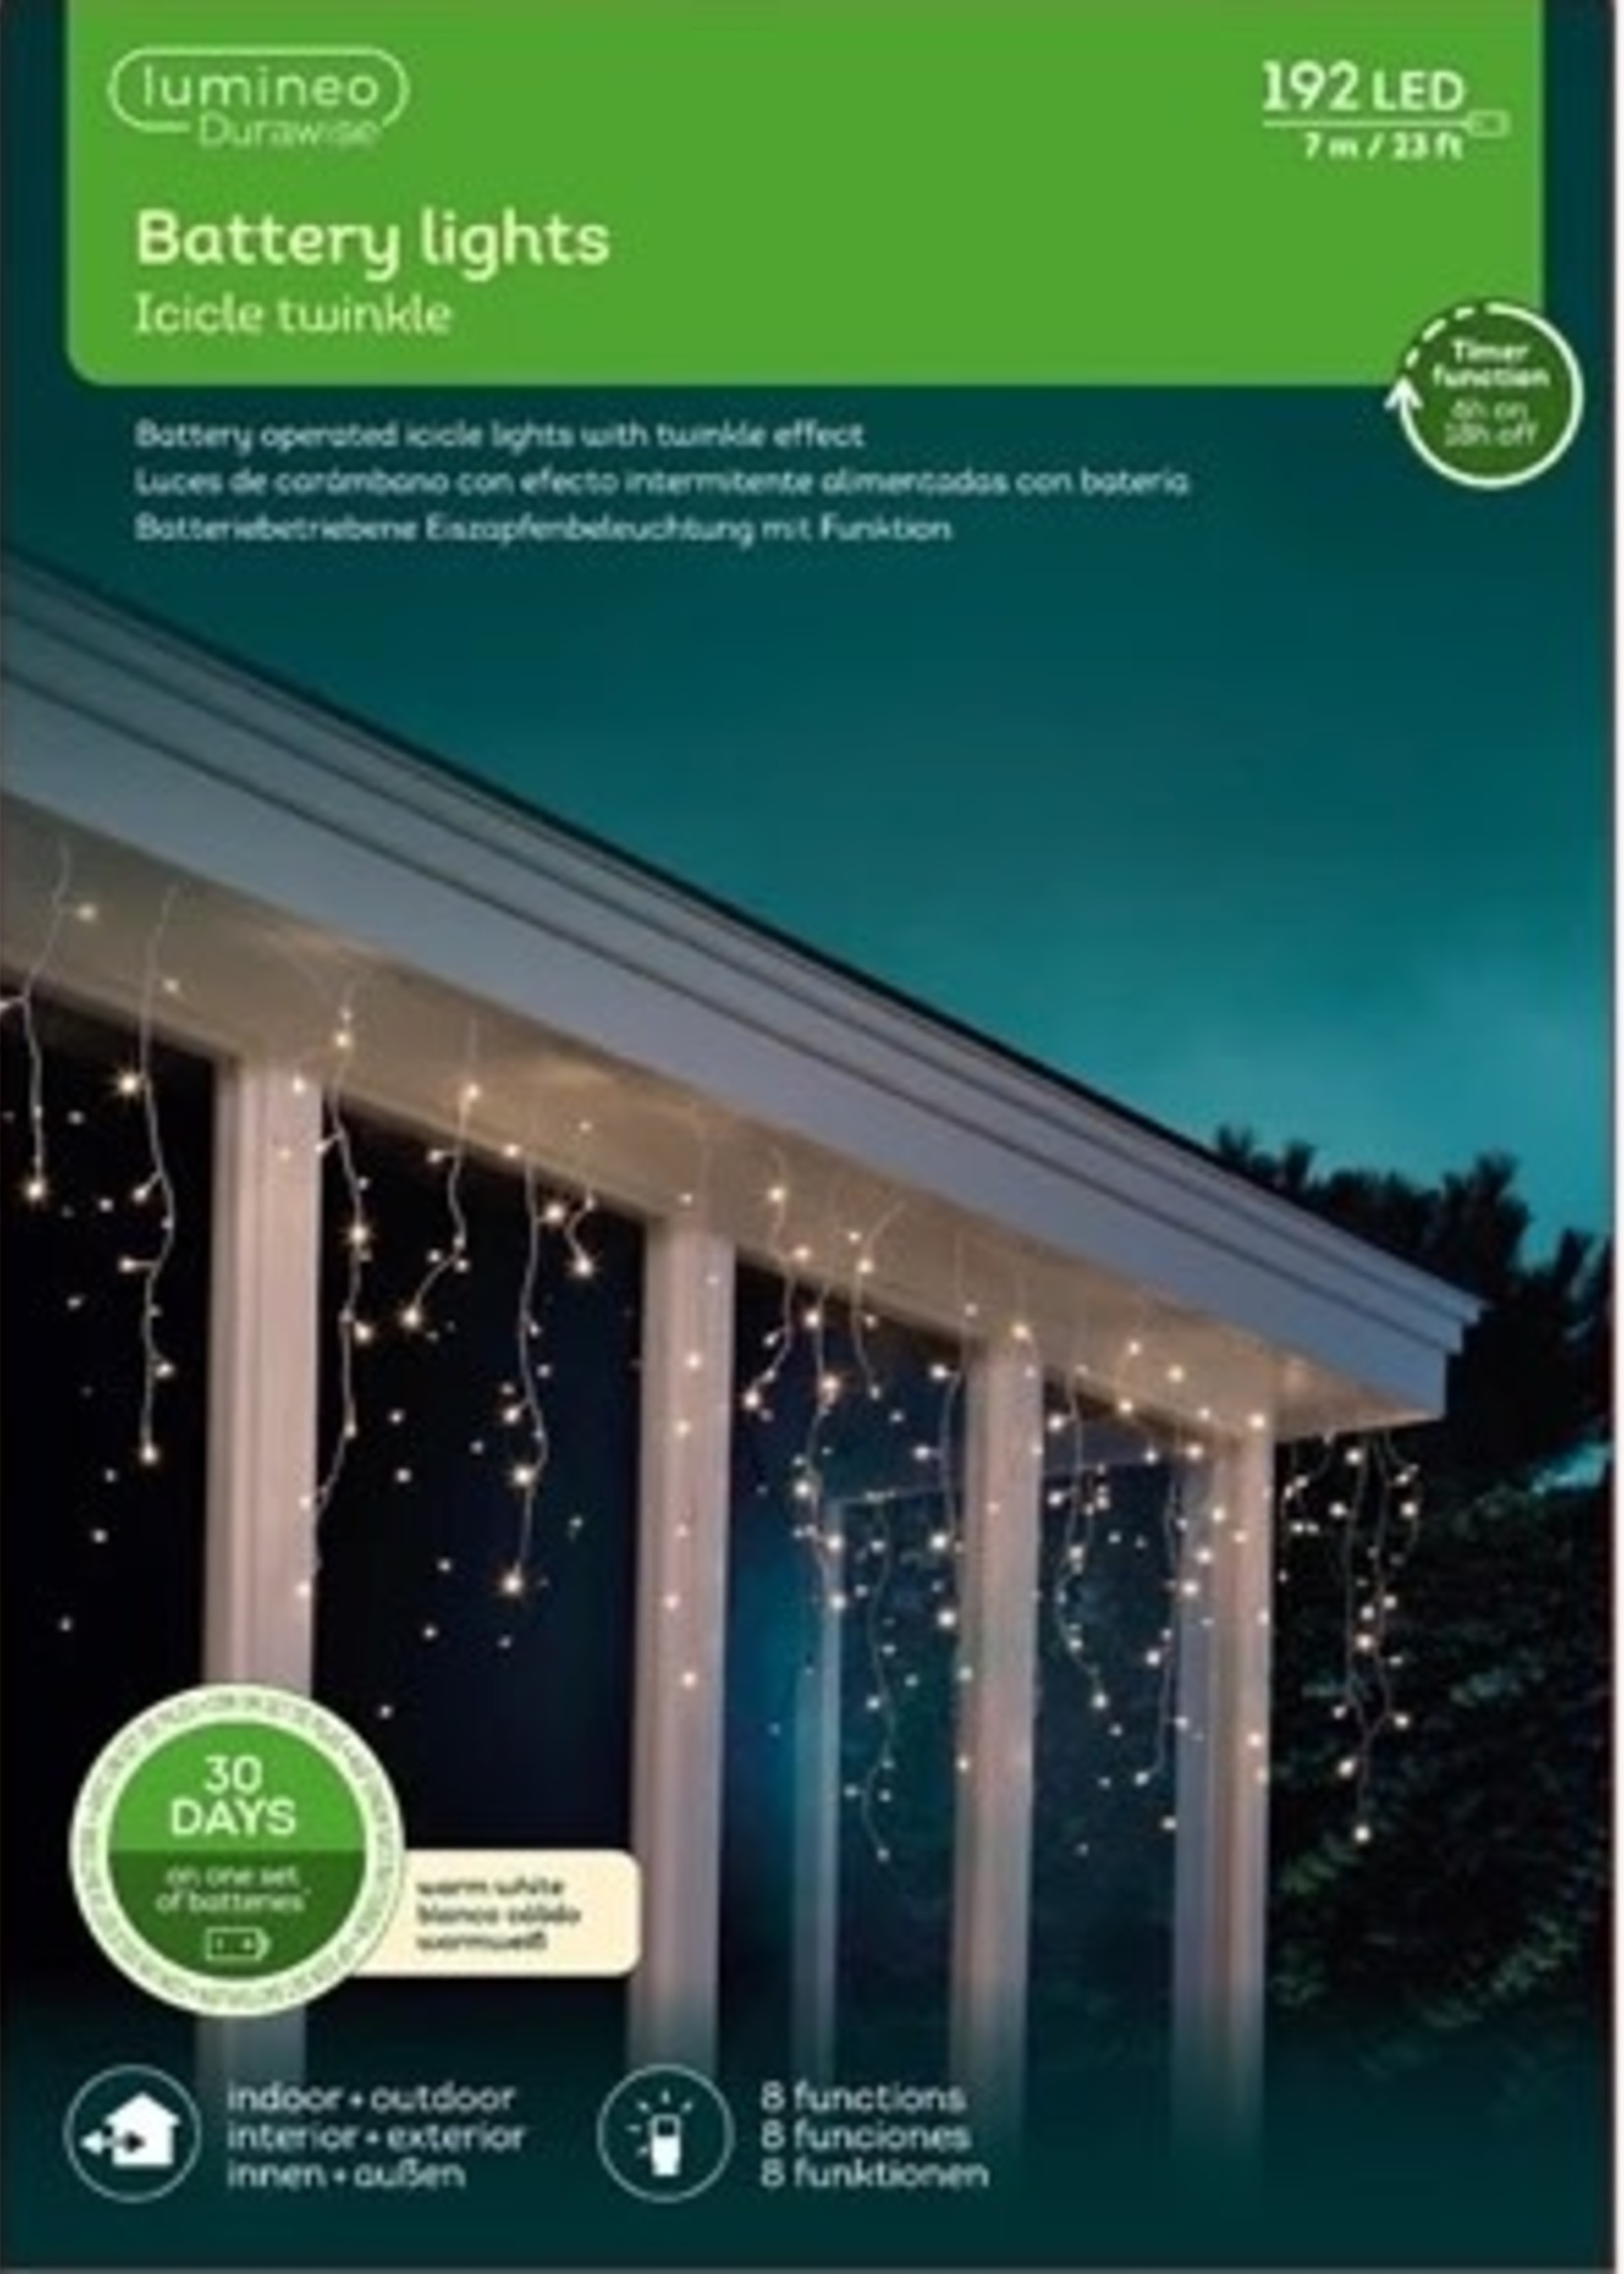 Lumineo Icicle LED Lights Battery 192 Warm White Indoor/Outdoor